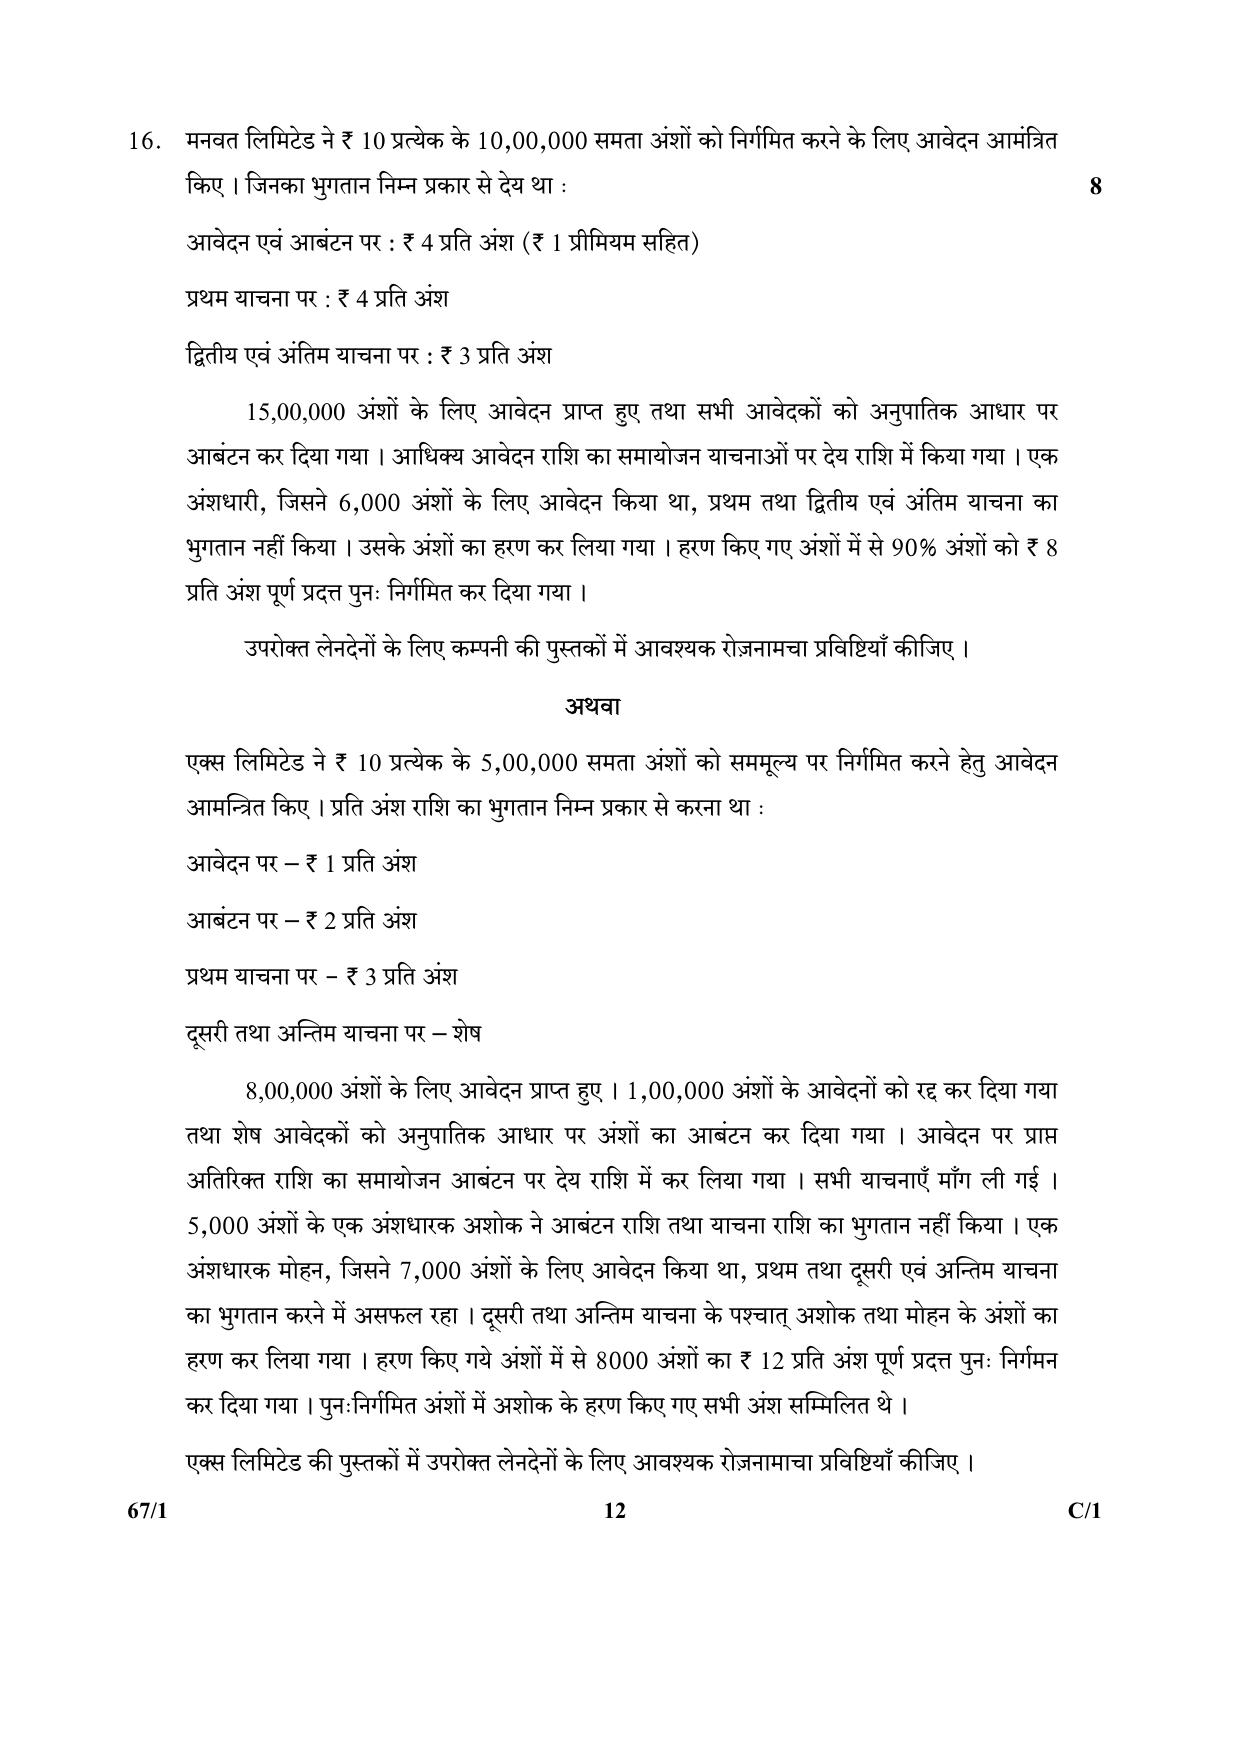 CBSE Class 12 67-1  (Accountancy) 2018 Compartment Question Paper - Page 12